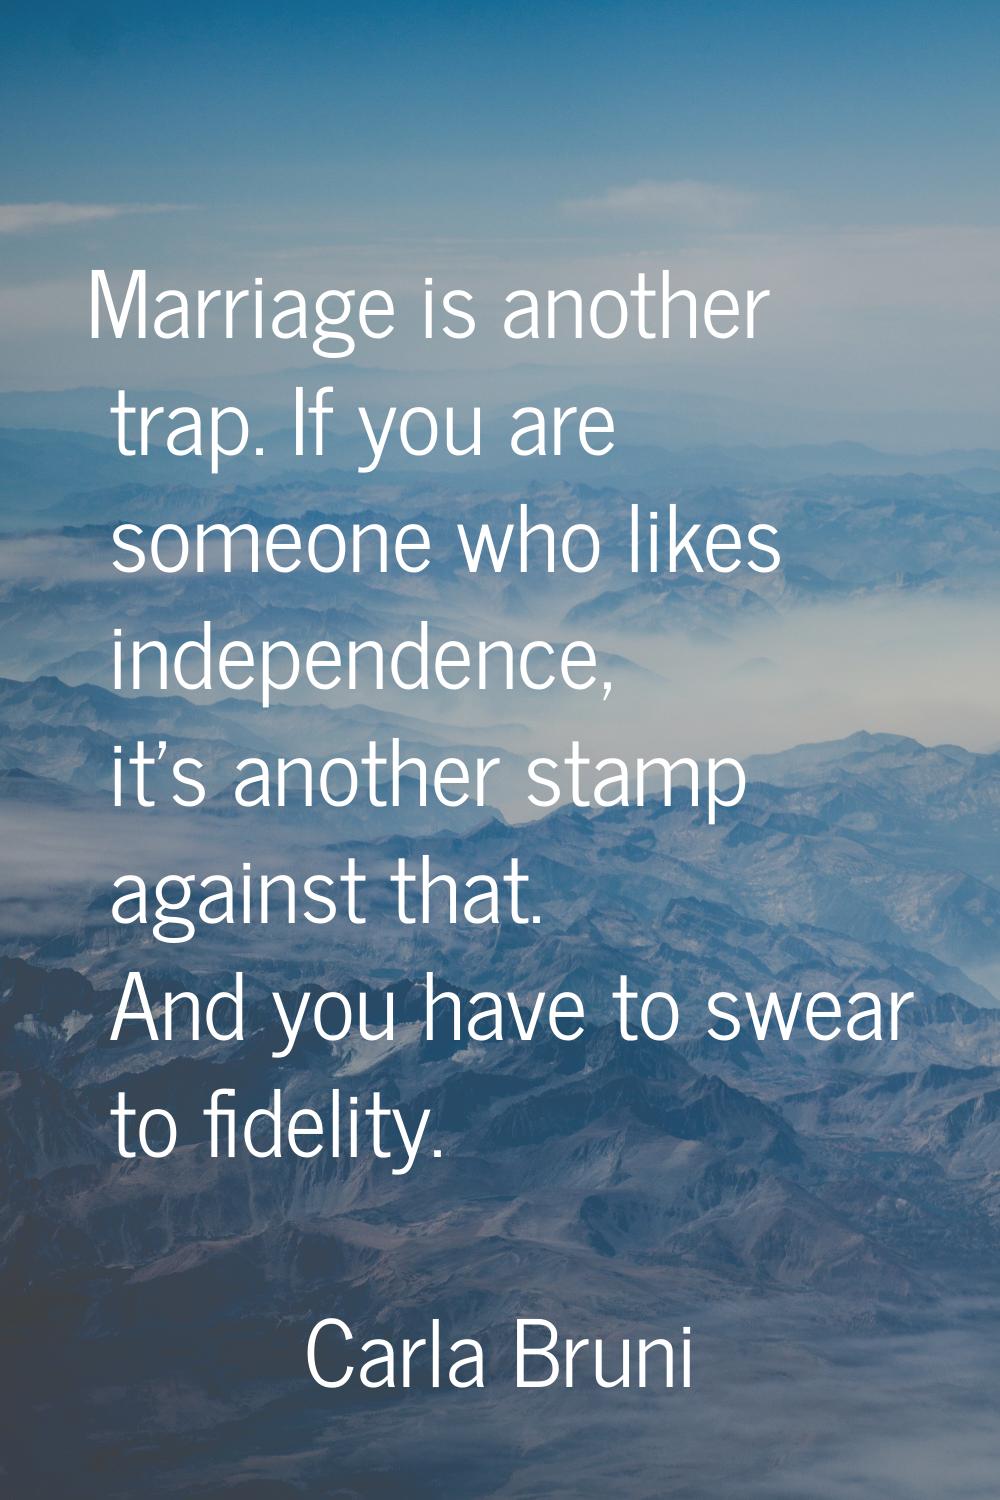 Marriage is another trap. If you are someone who likes independence, it's another stamp against tha